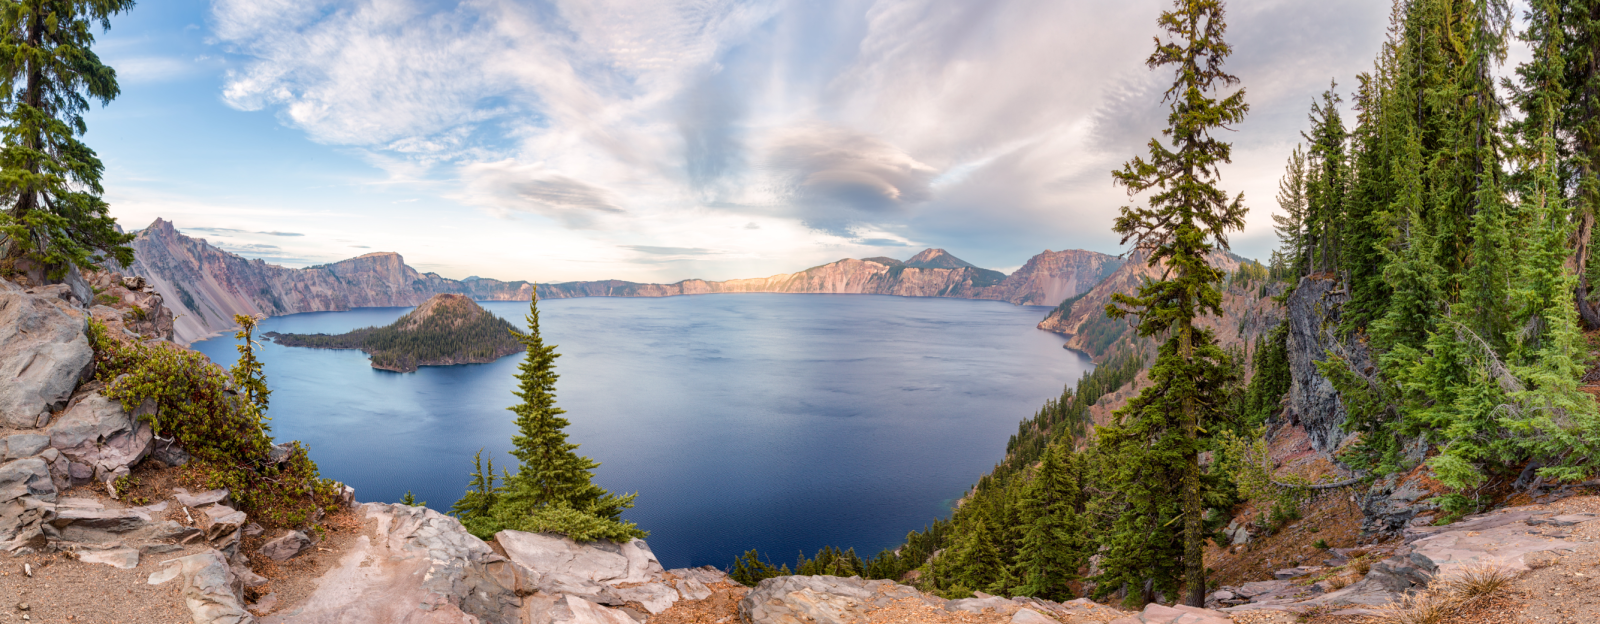 A wide photo of Crater Lake with clouds in the background and evergreens in the forefront